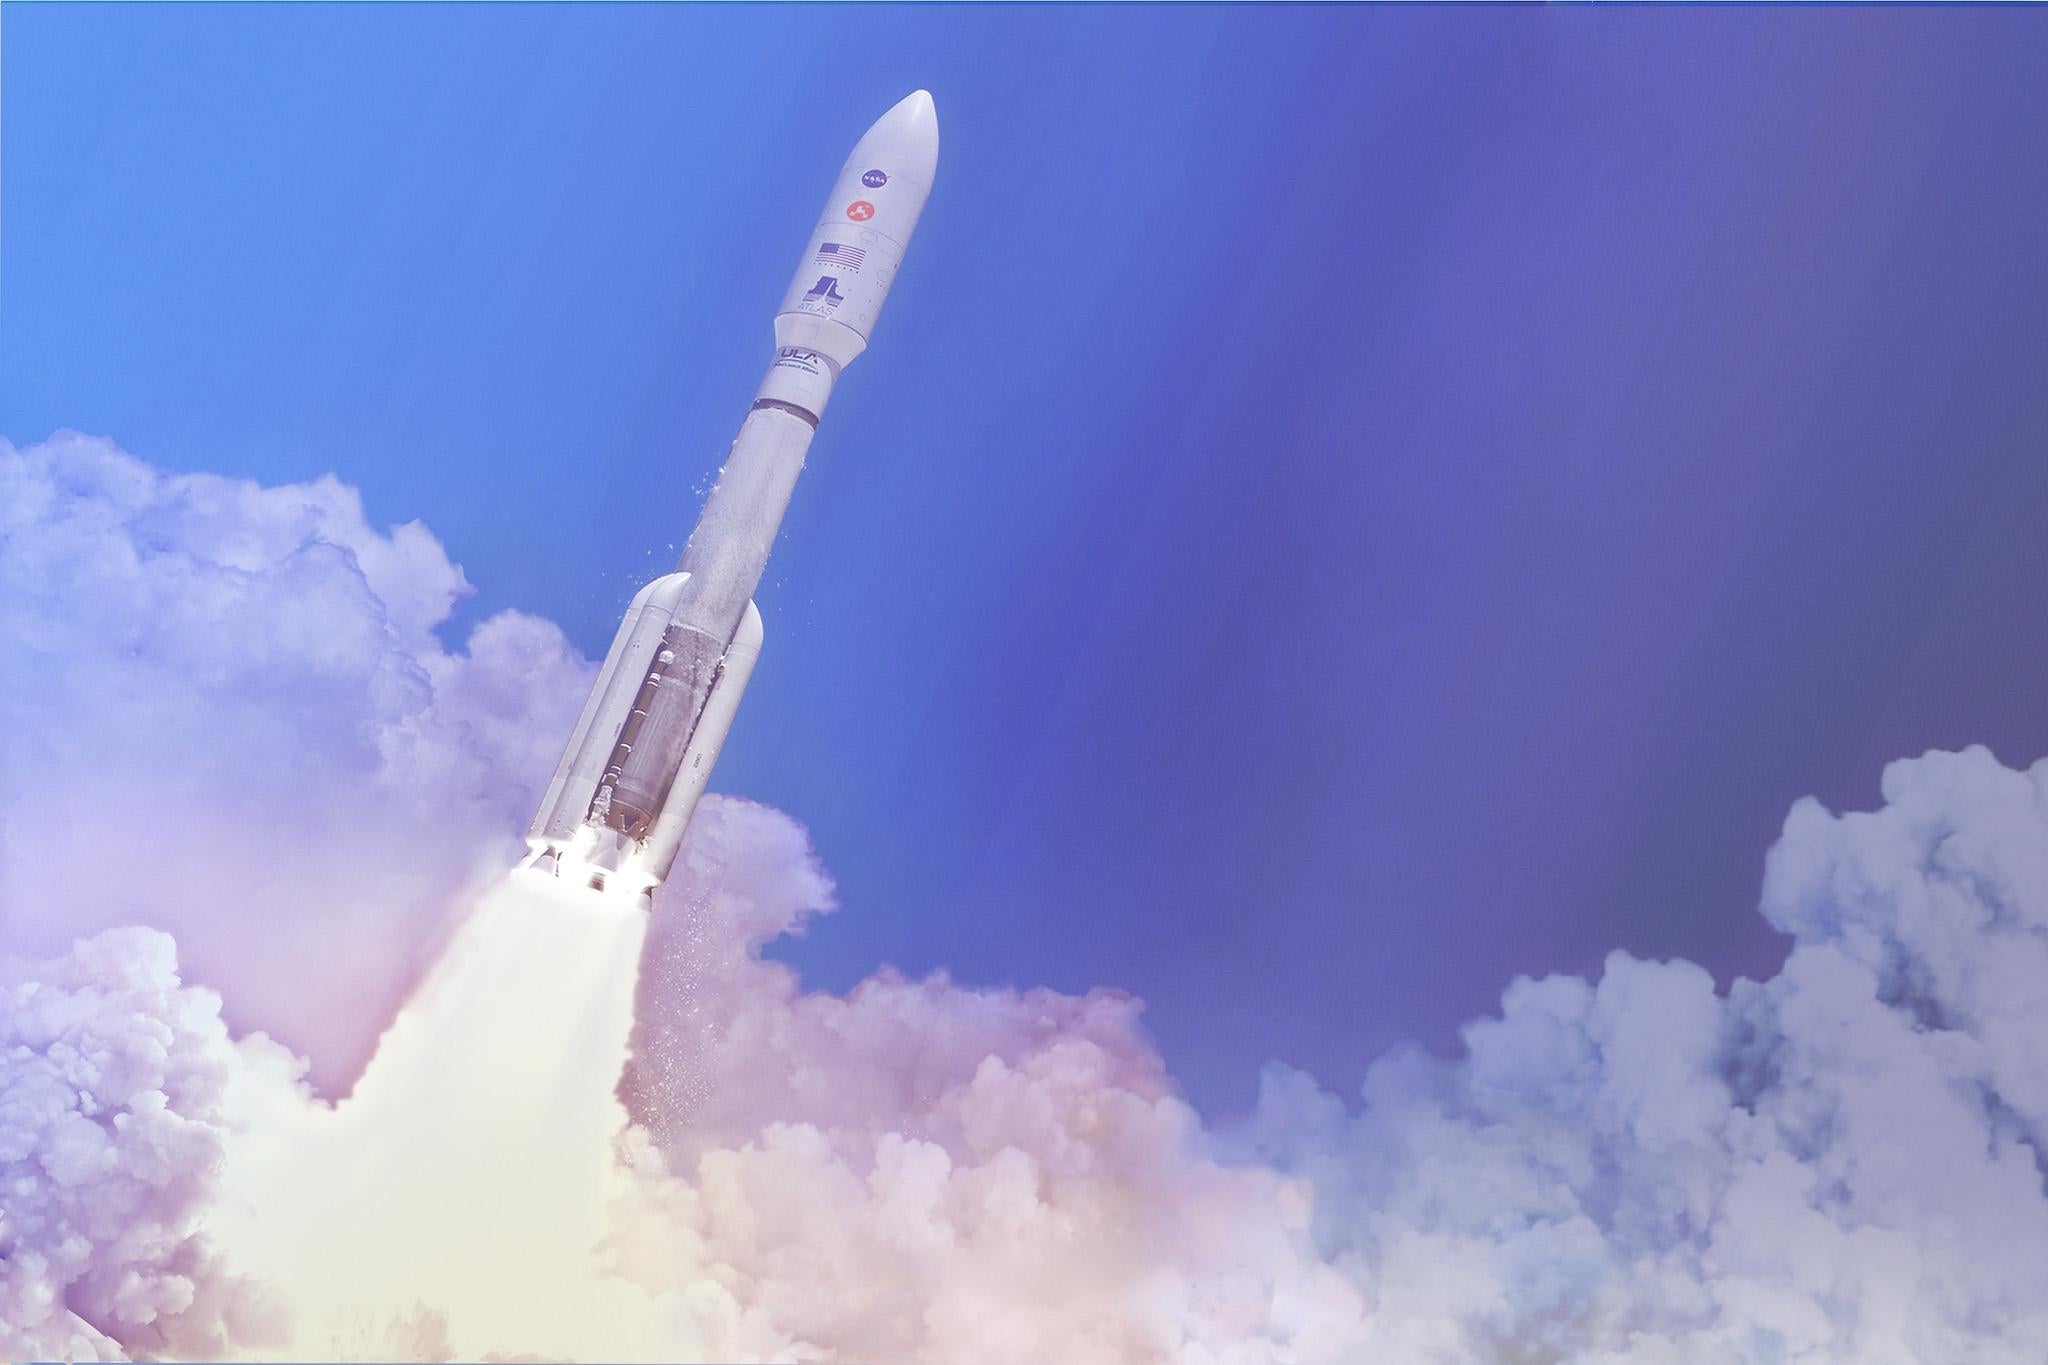 In this artist's concept, a two-stage United Launch Alliance (ULA) Atlas V launch vehicle speeds the Mars 2020 spacecraft toward the Red Planet